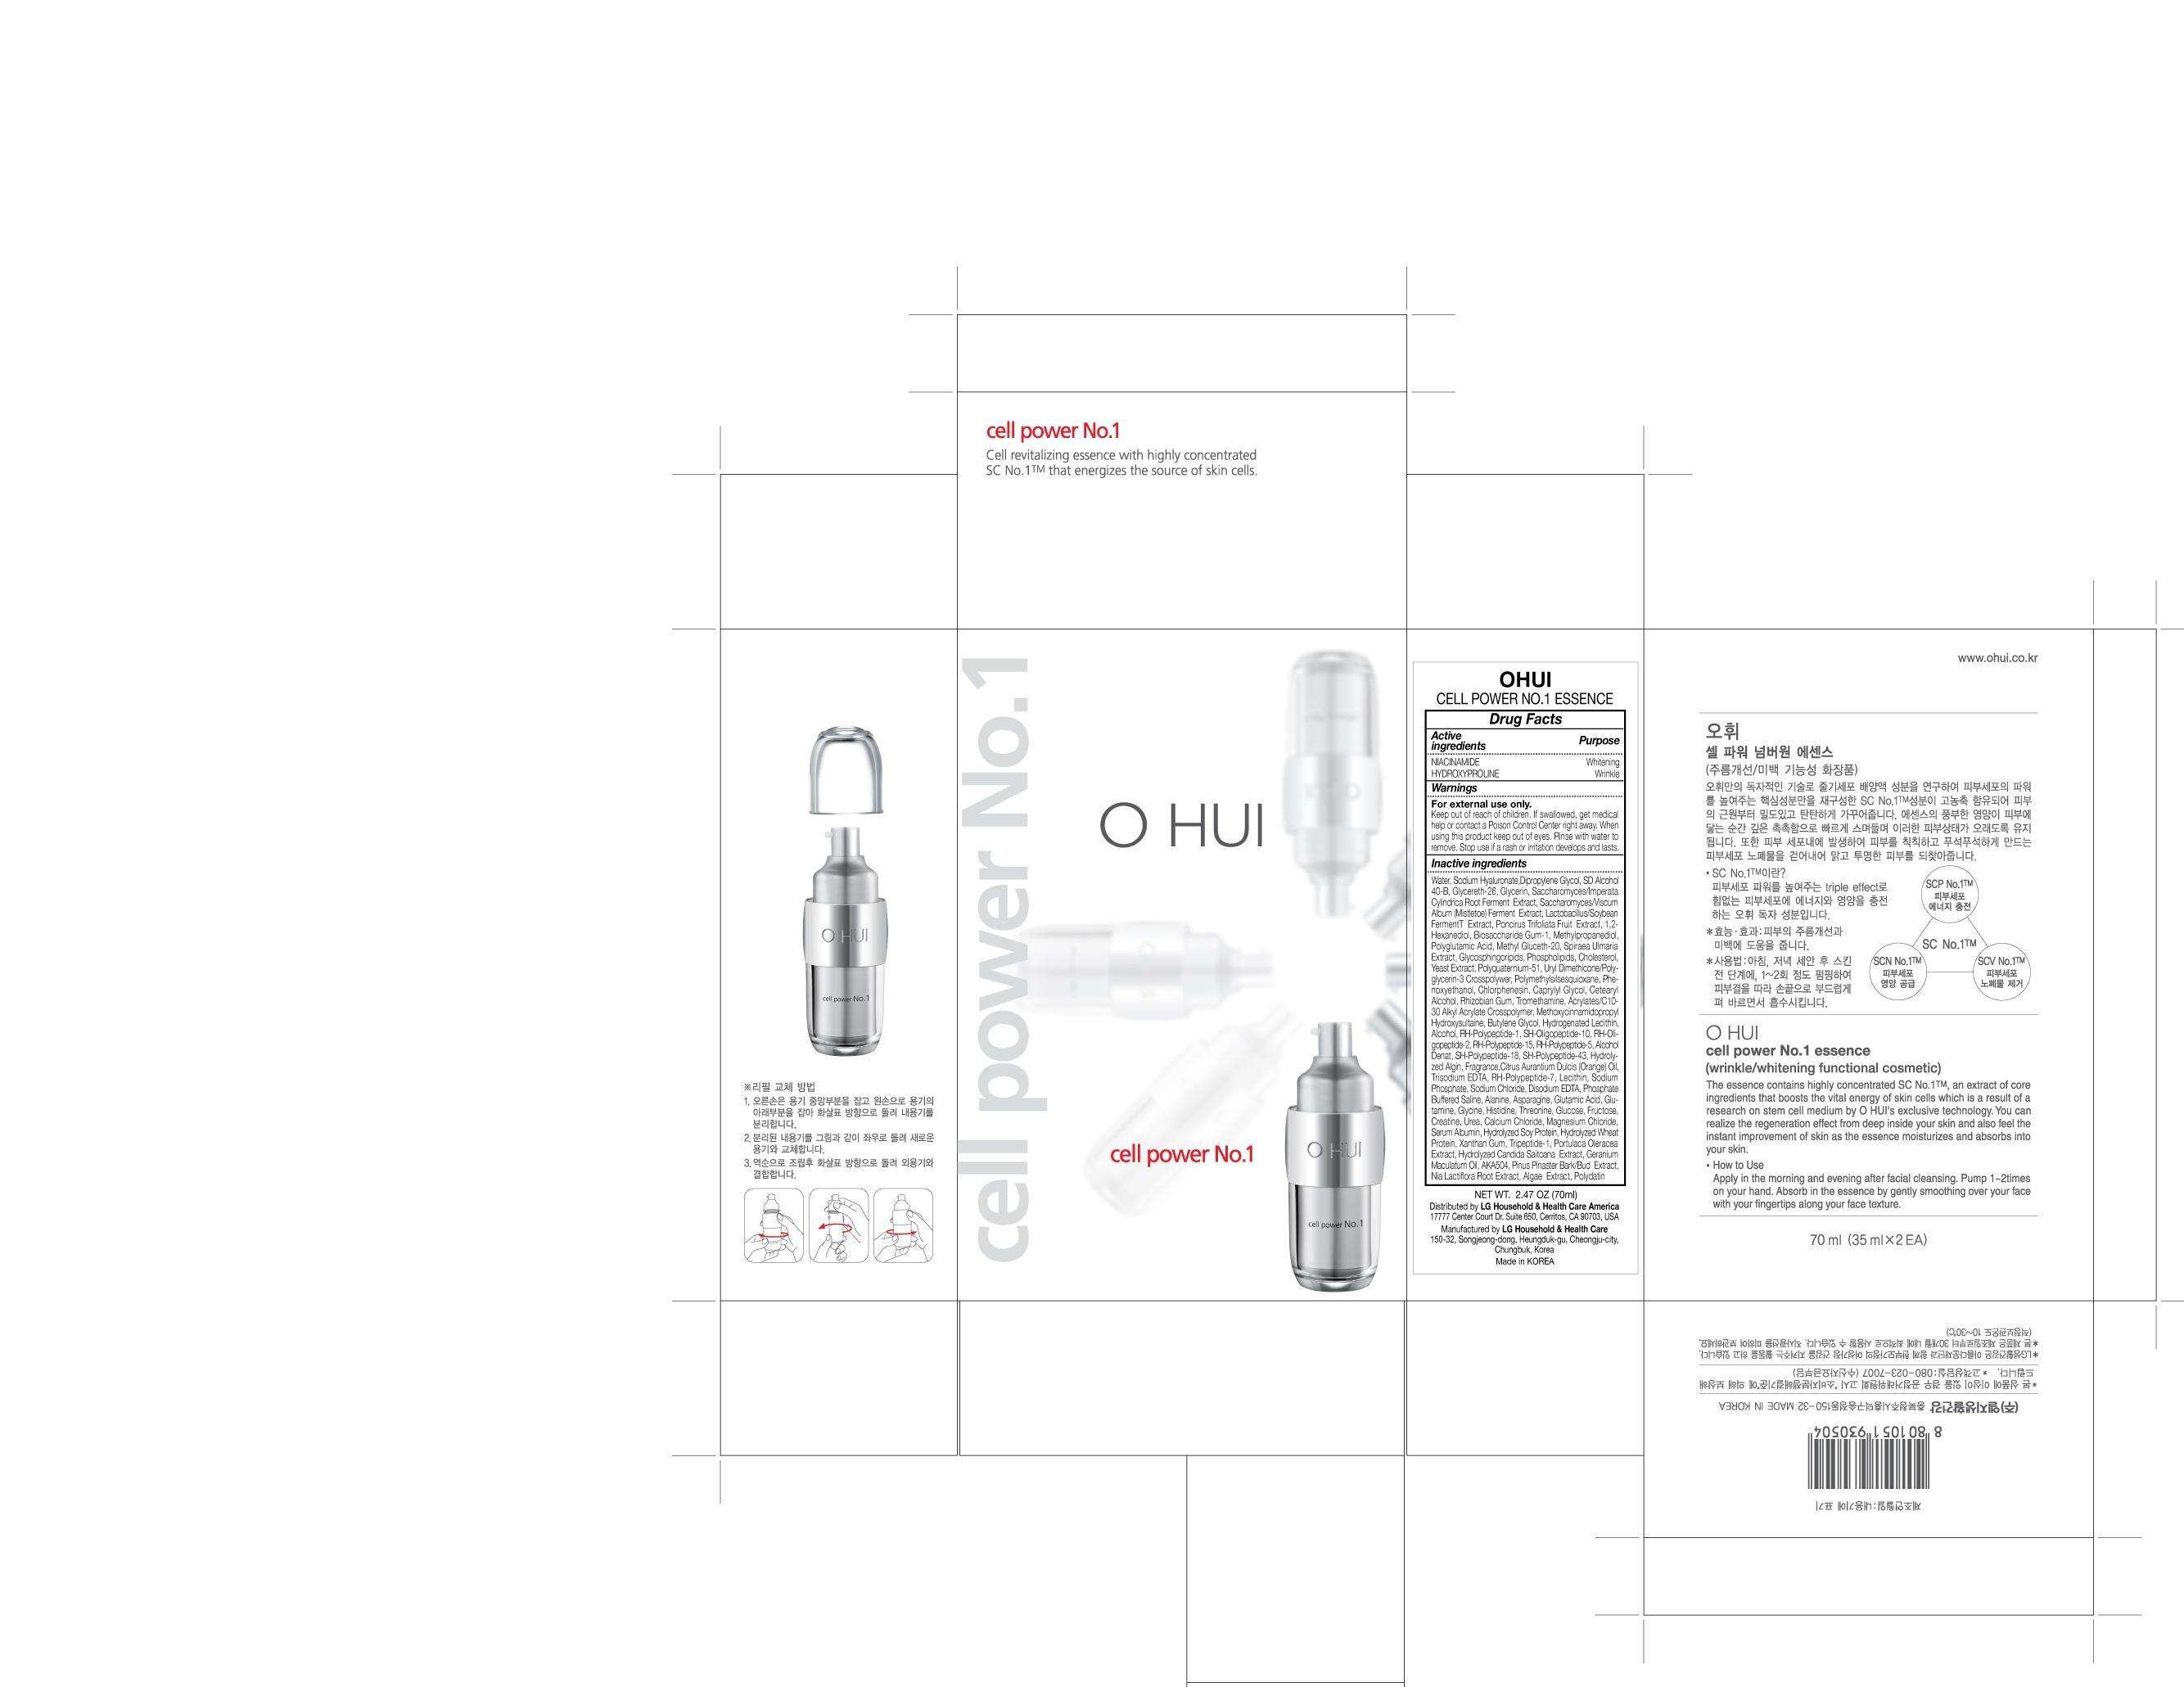 OUHI CELL POWER NO 1 ESSENCE